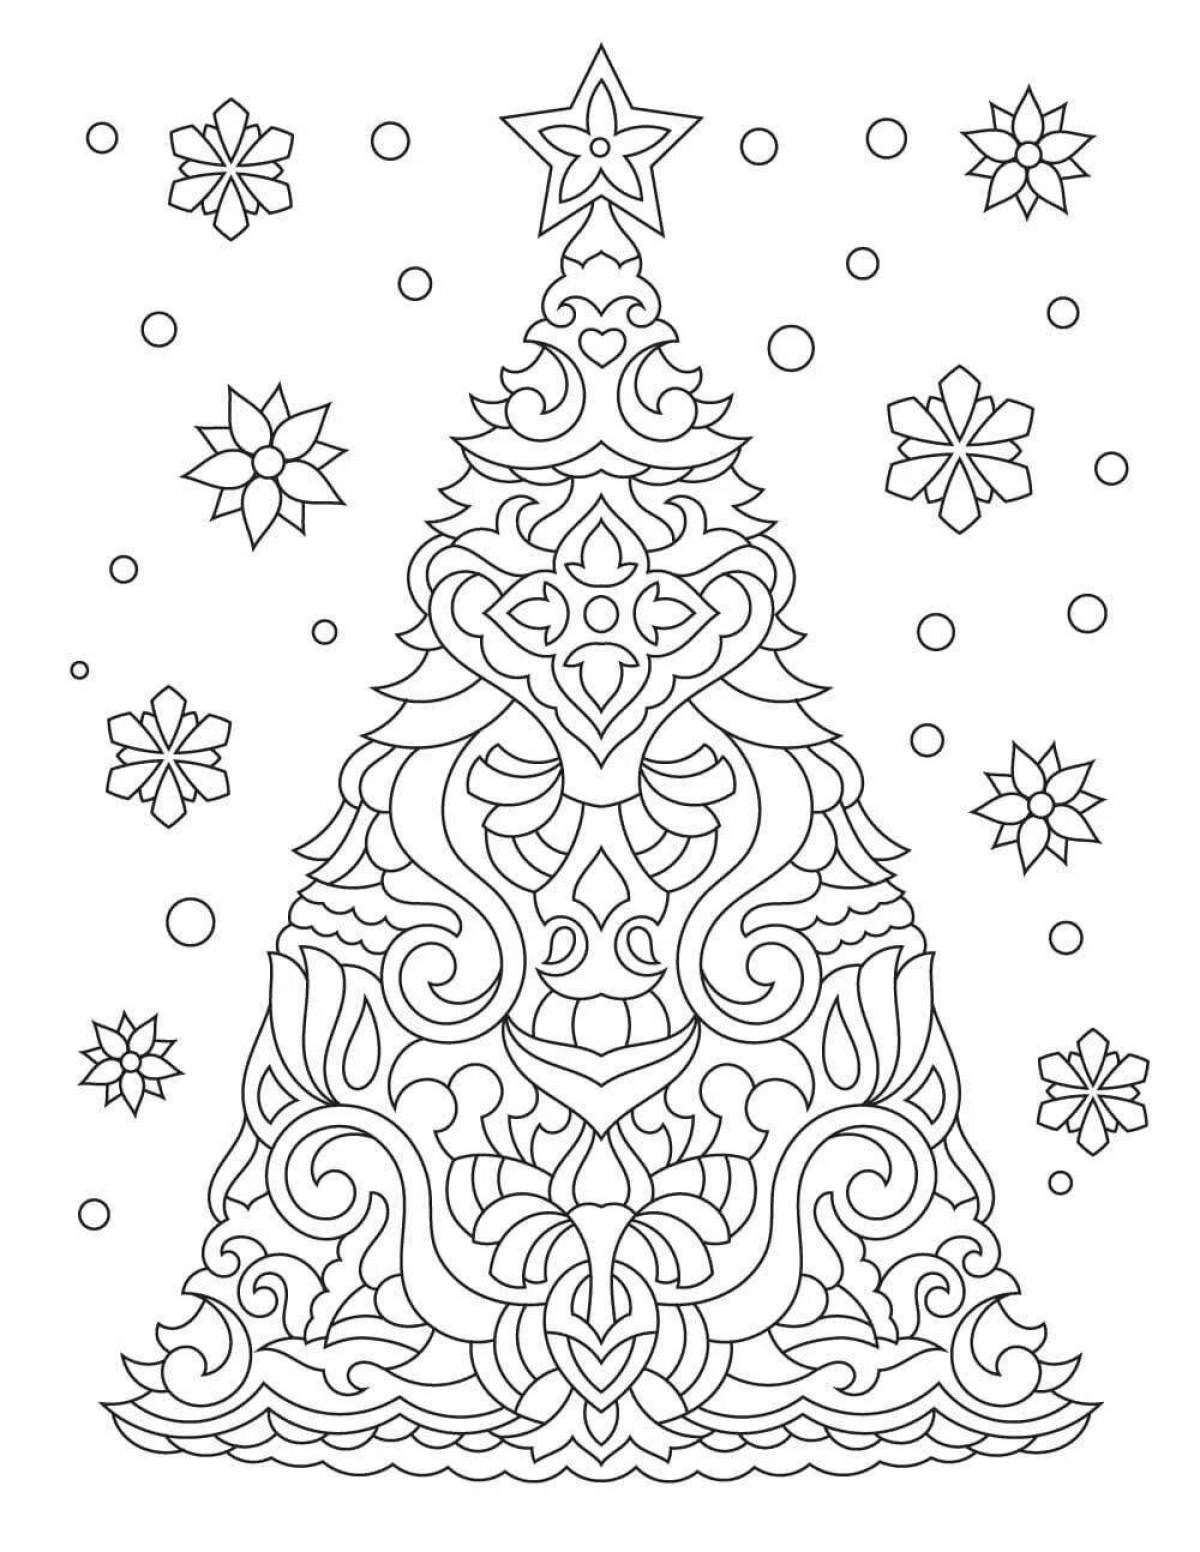 Exquisite tree coloring book for girls